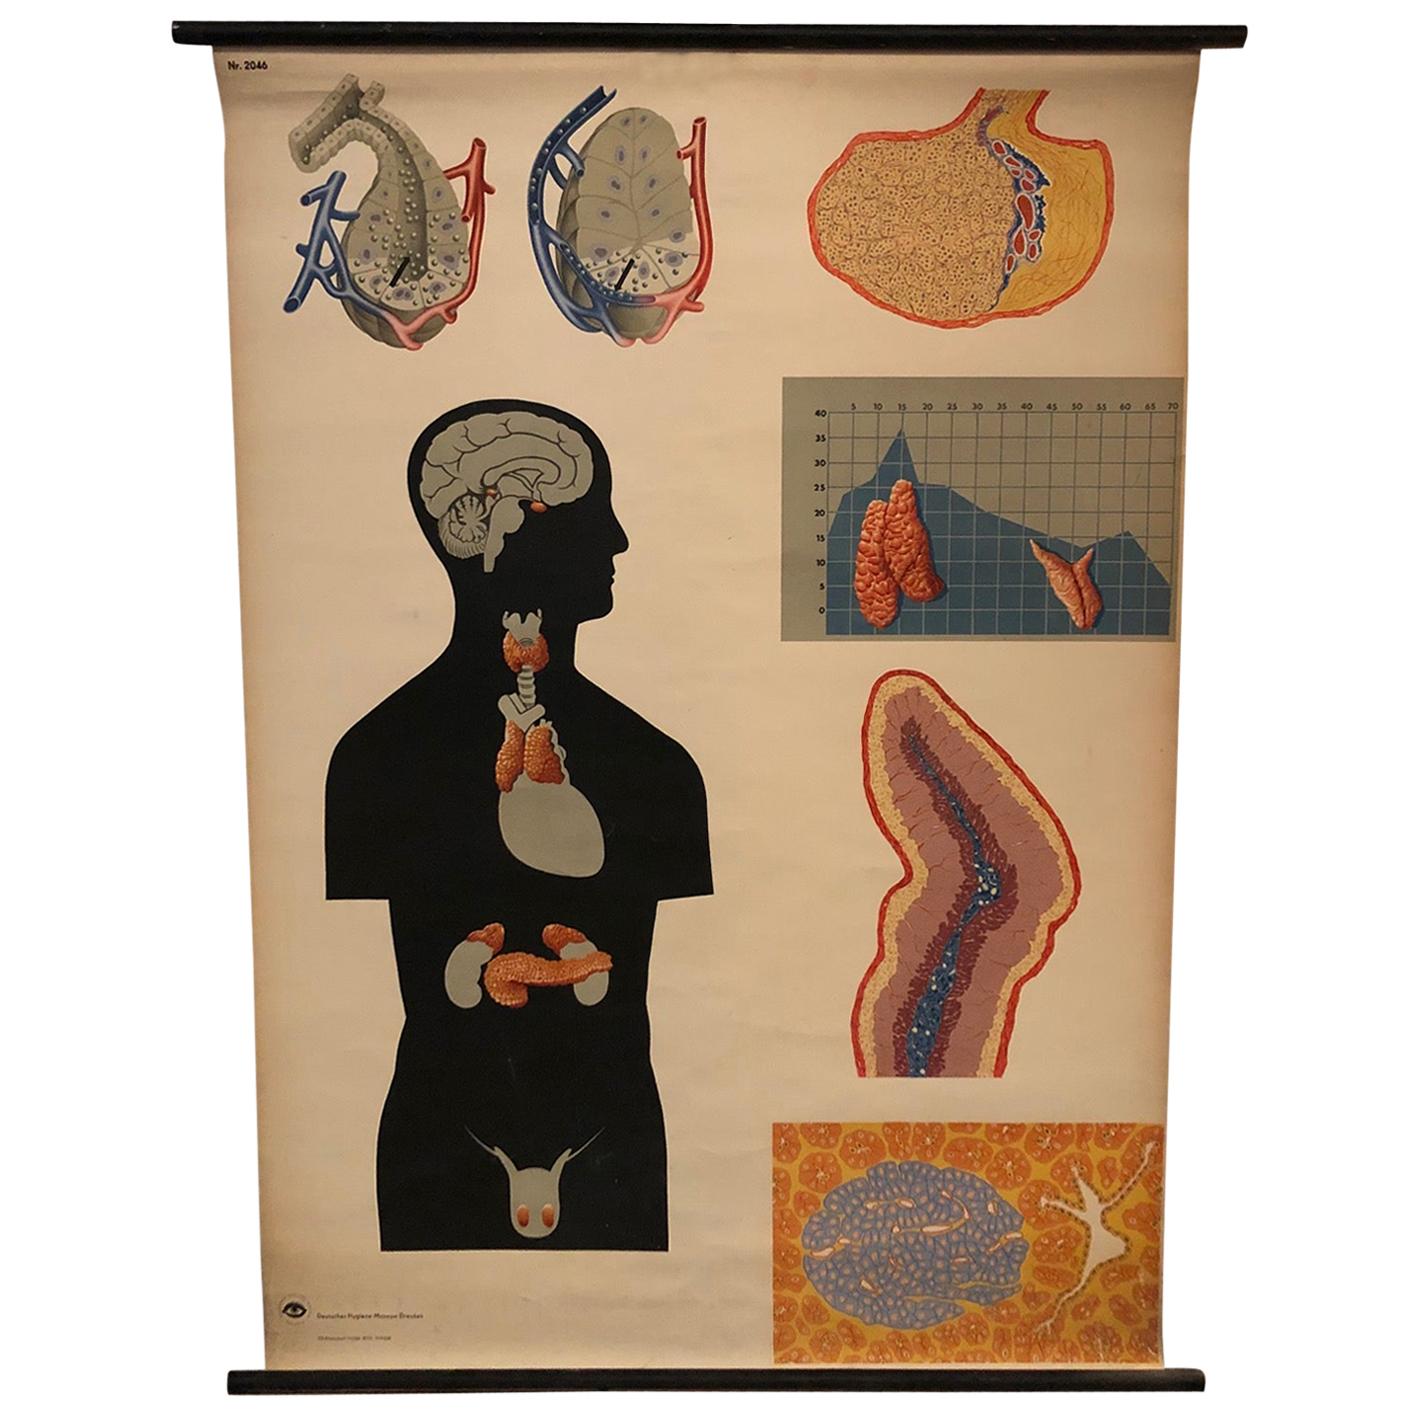 German Anatomical Educational Endocrine System Chart